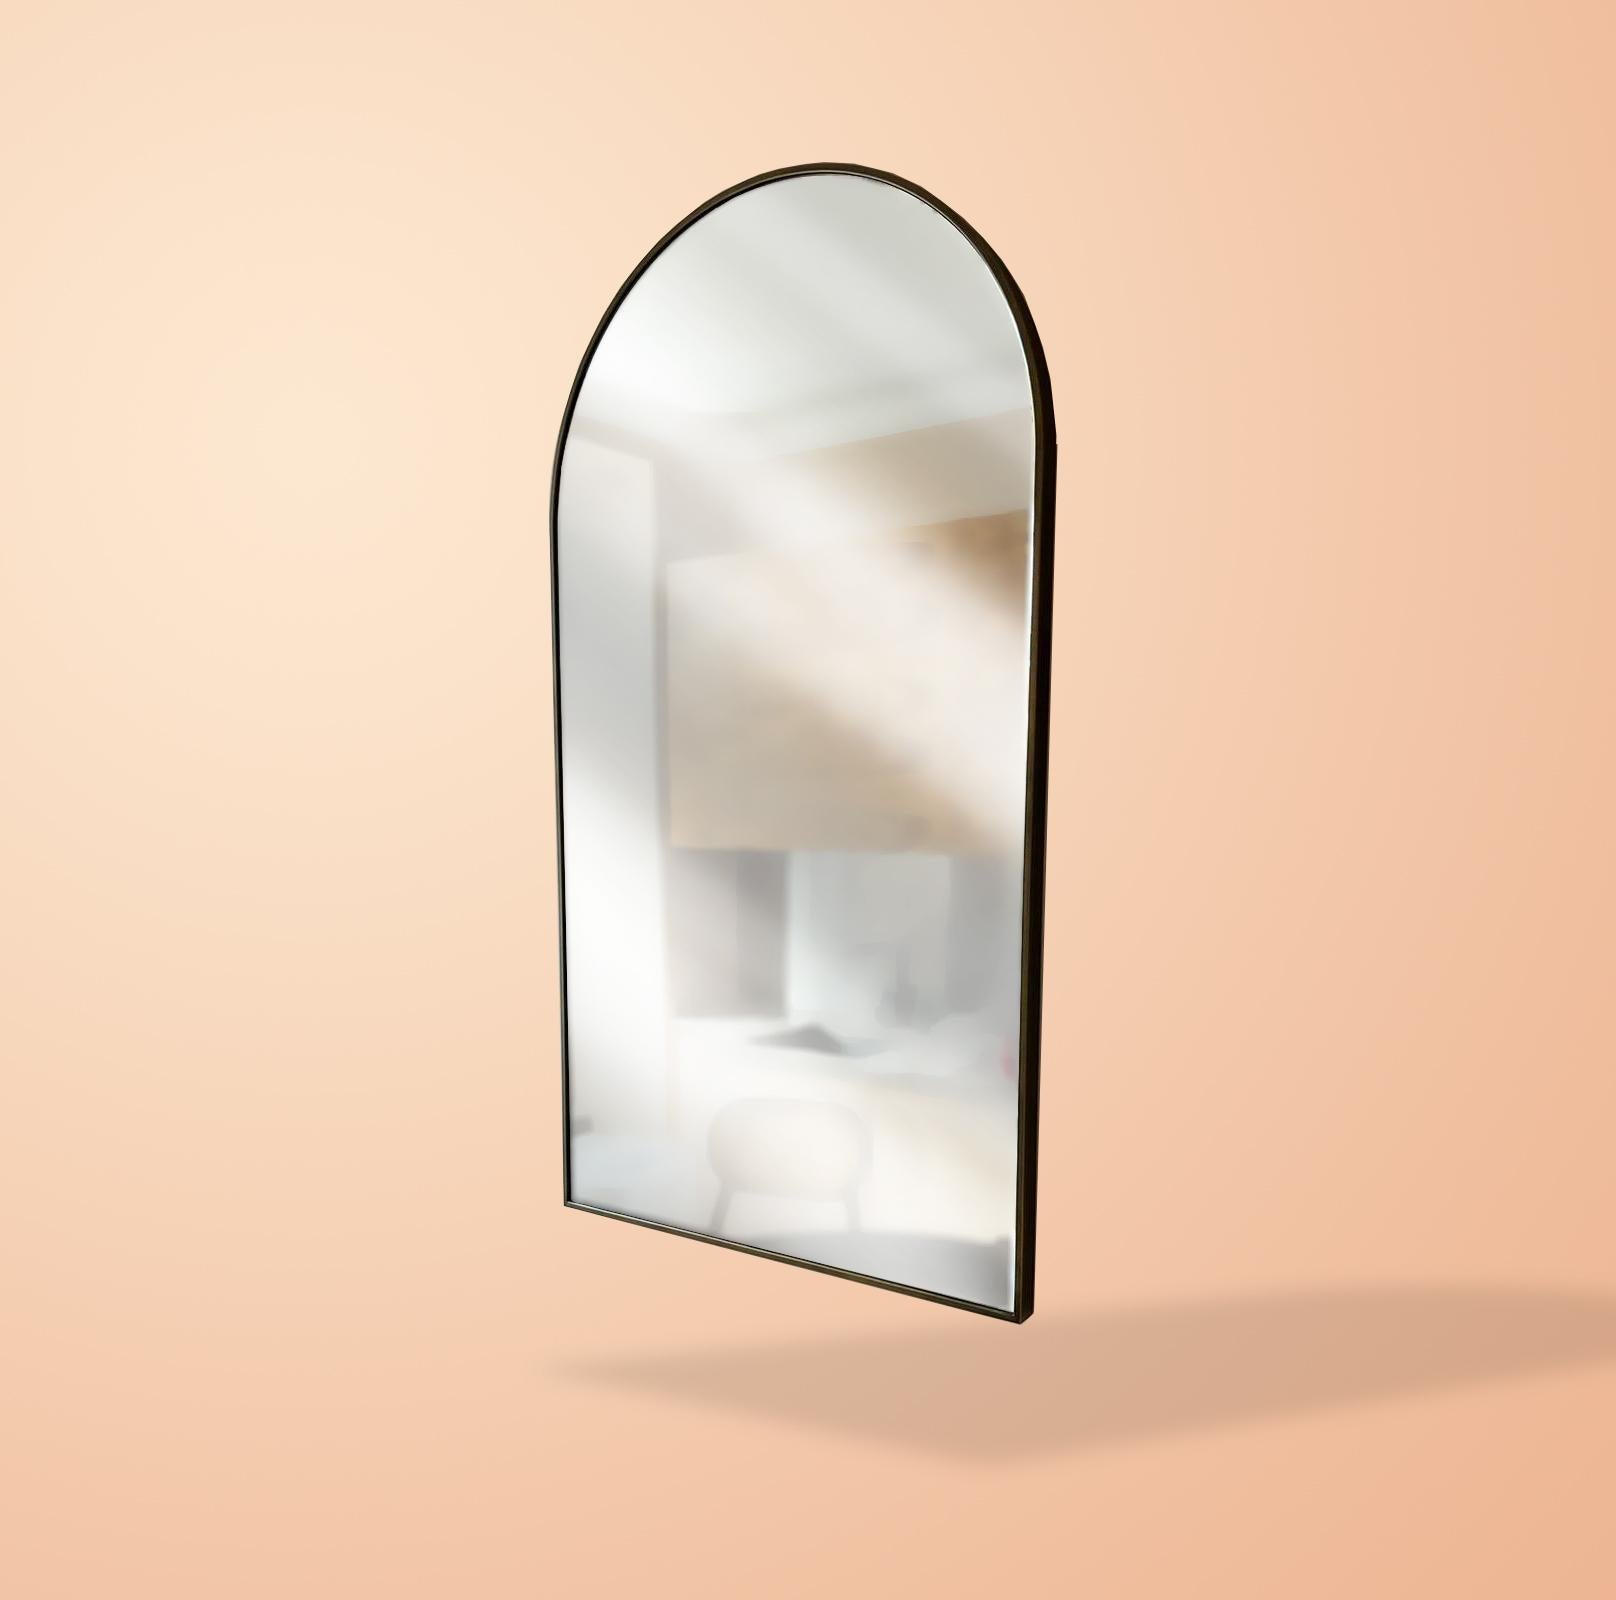 The Archie mirror is a clear mirror with a dark bronze finish metal frame.
It can be hung or it can just lean on the wall and be used as a dressing mirror.

The border of the frame is 20mm thick and 40mm deep. The depth of the mirror is used to hide